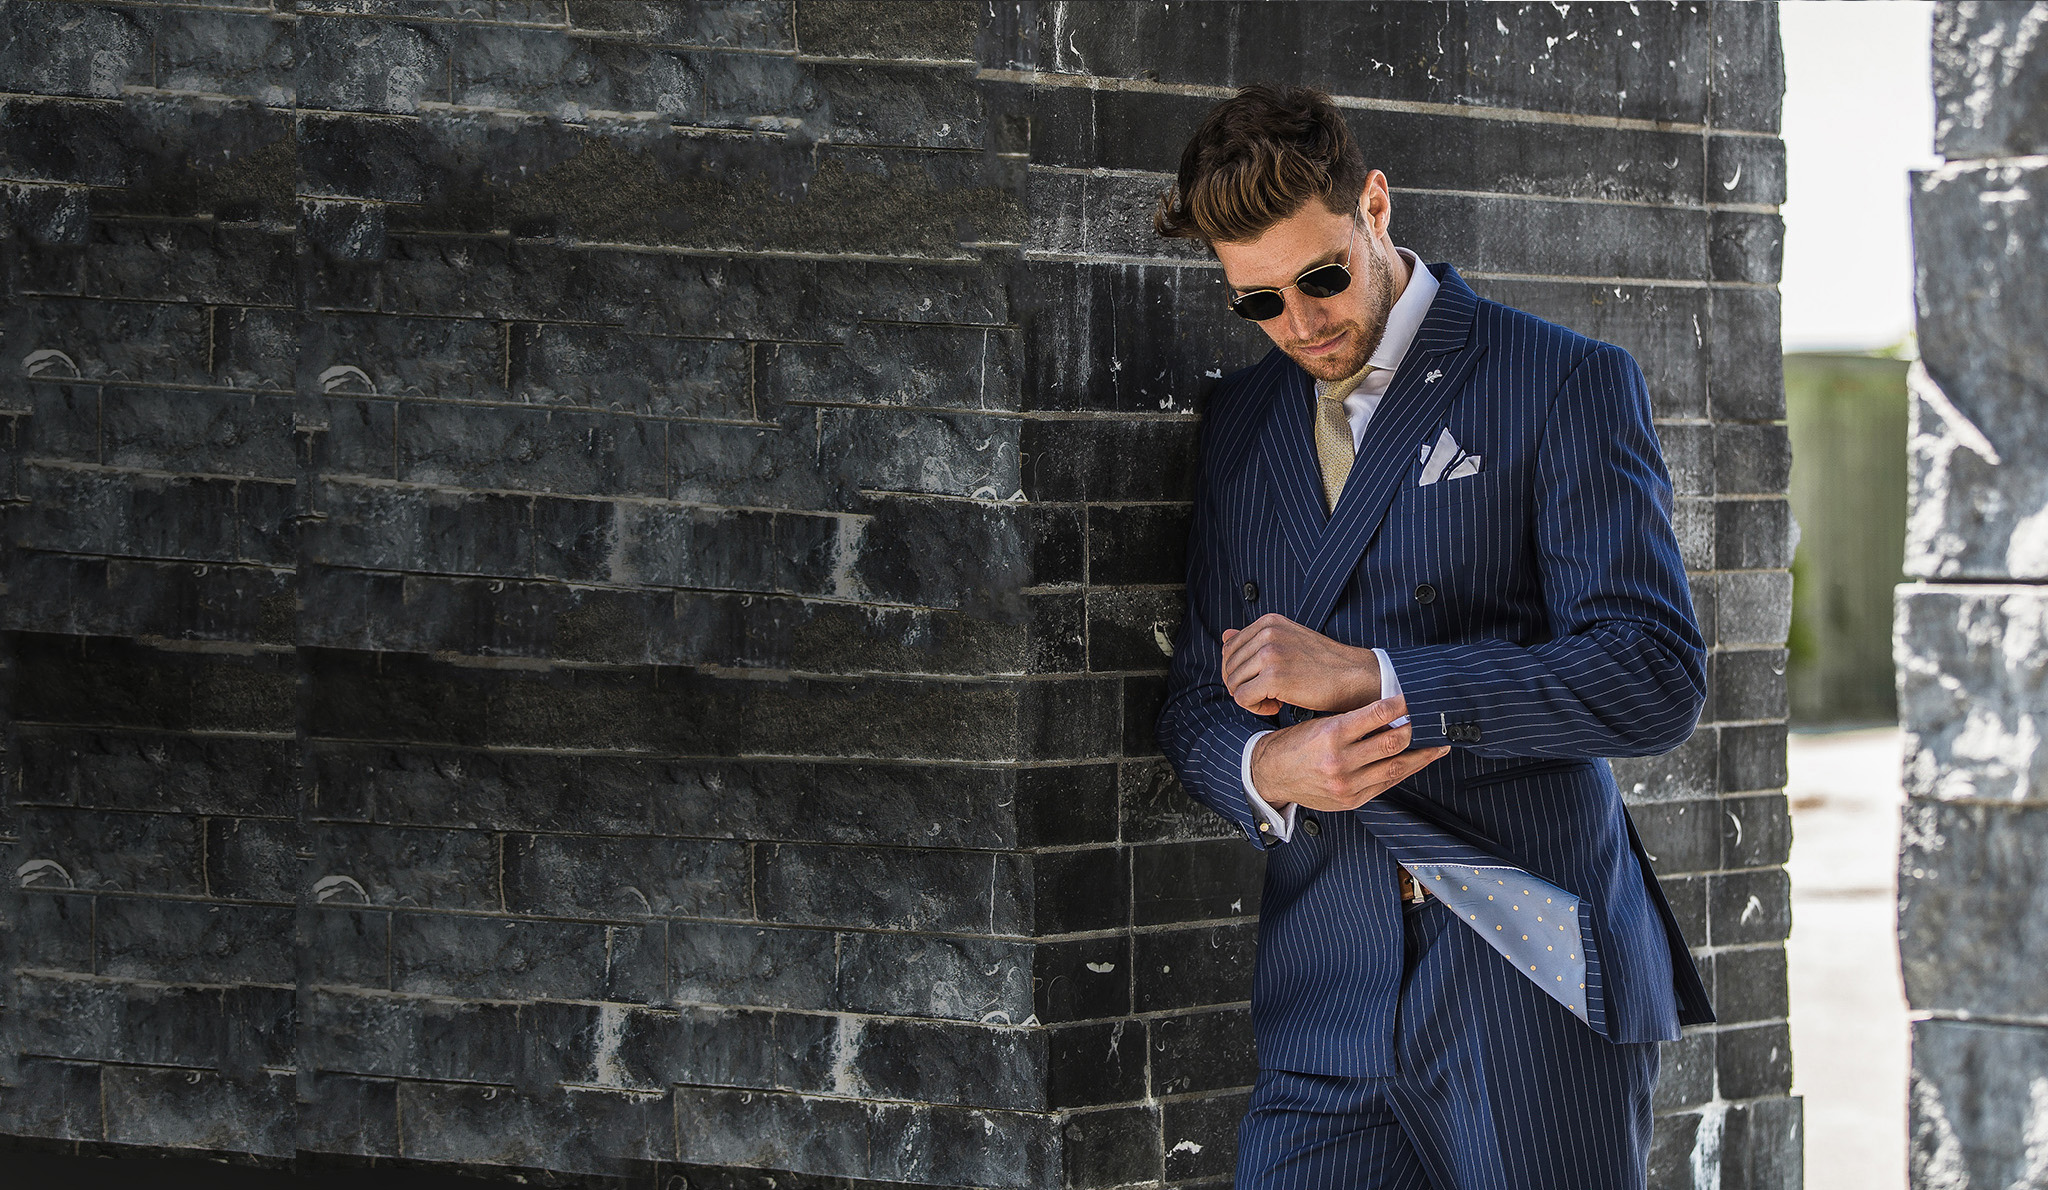 The Enduring Appeal of Three Piece Suits for Men